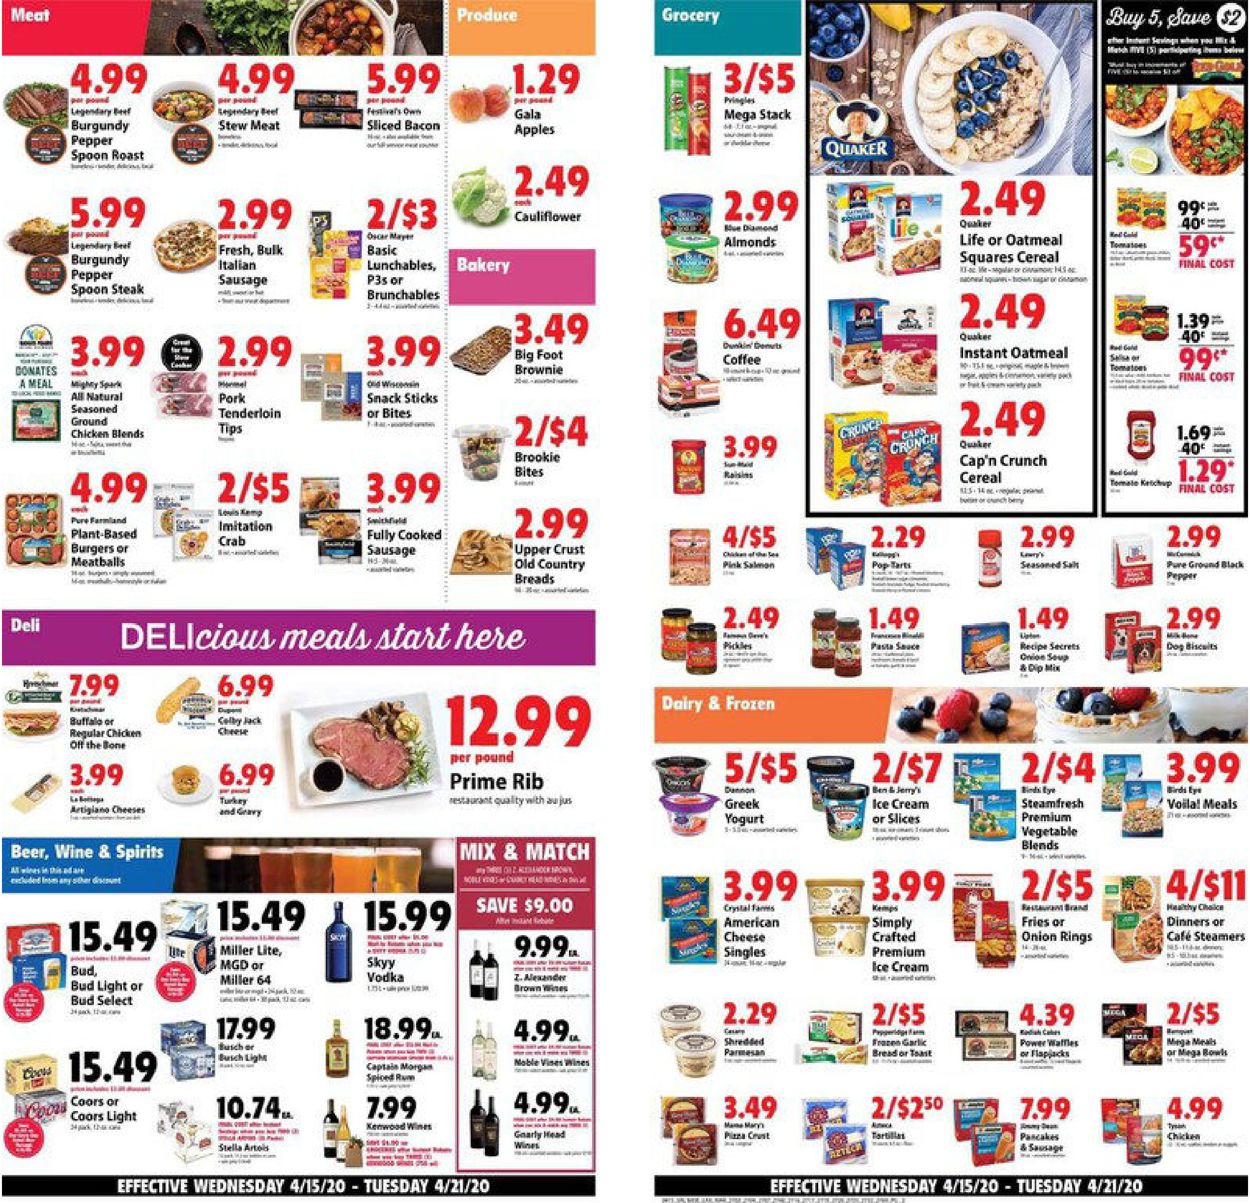 Festival Foods Weekly Ad Circular - valid 04/15-04/21/2020 (Page 2)